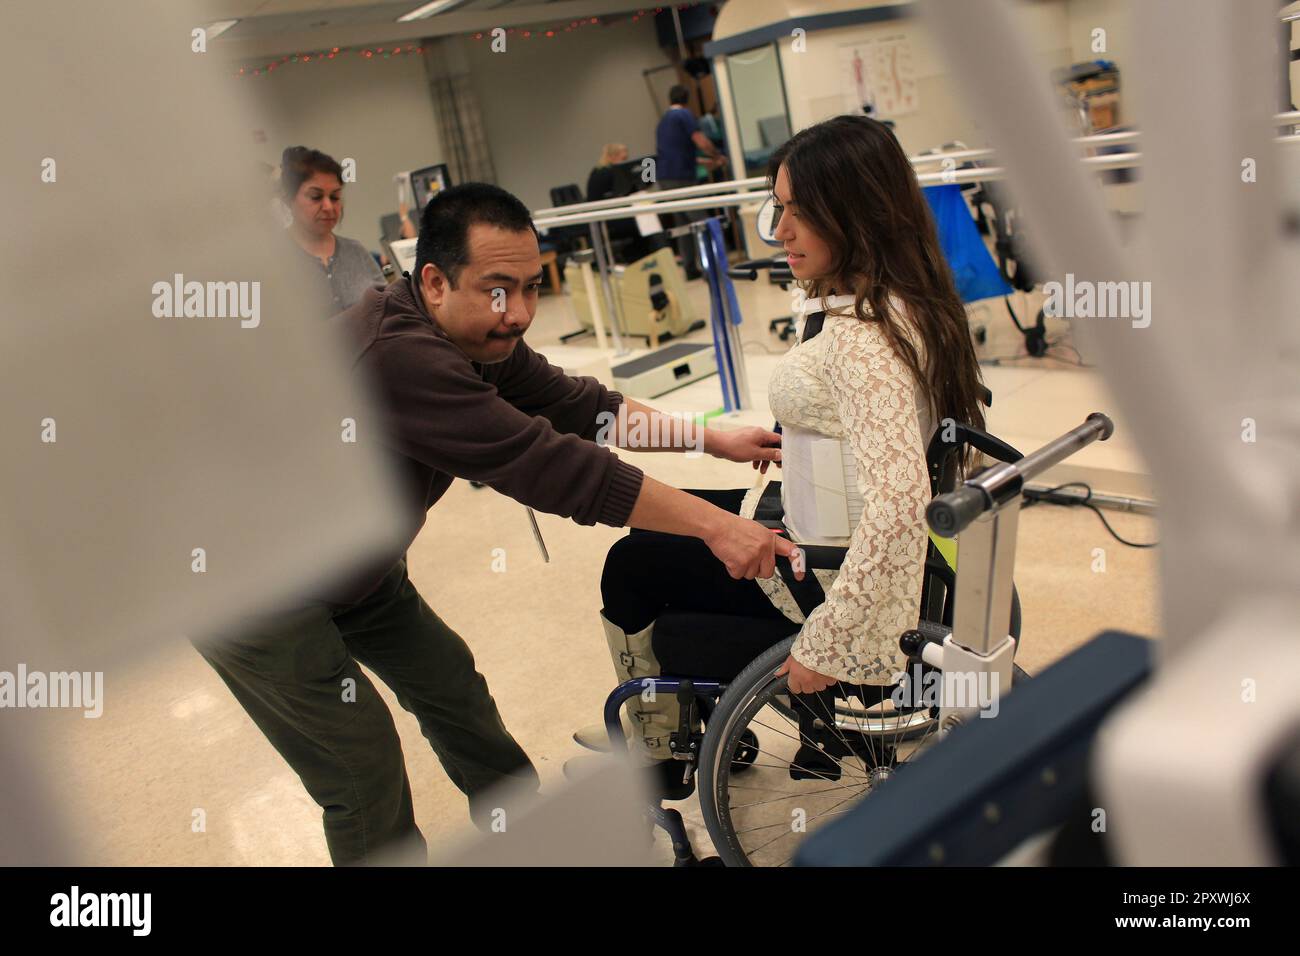 https://c8.alamy.com/comp/2PXWJ6X/katy-sharify-left-who-received-stem-cell-therapy-before-the-study-she-was-part-of-was-cancelled-moves-between-exercise-machines-in-the-cypress-semiconductor-spinal-cord-rehabilitation-gym-with-help-from-physical-therapist-marion-leano-right-at-santa-clara-valley-medical-center-on-tuesday-december-13-2011-in-san-jose-calif-lea-suzukisan-francisco-chronicle-via-ap-2PXWJ6X.jpg